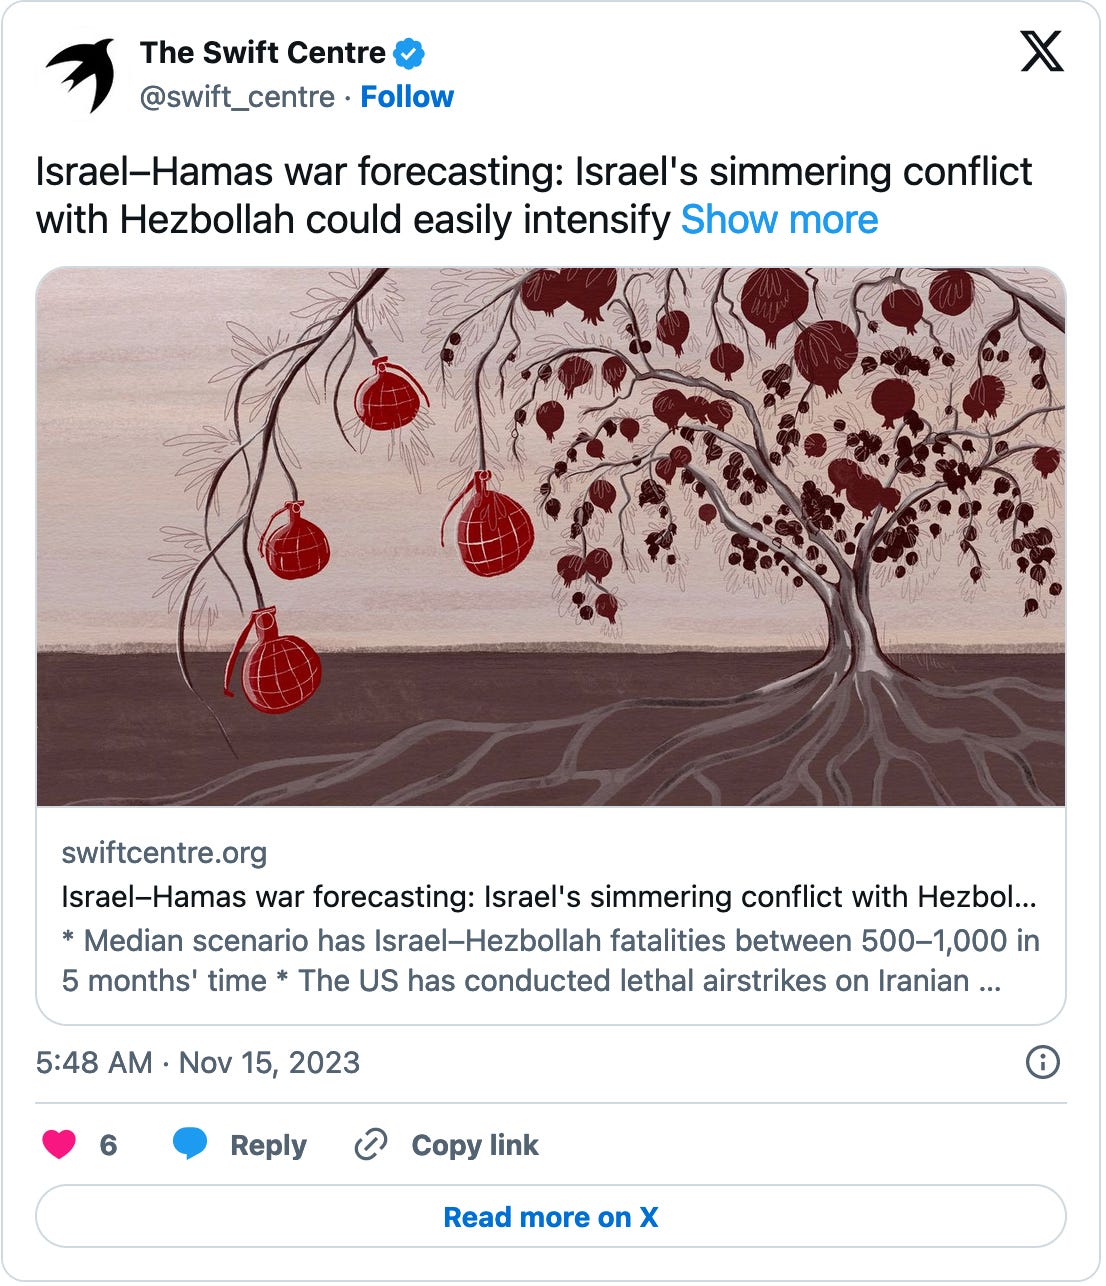 November 15, 2023 tweet from the Swift Centre reading, "Israel–Hamas war forecasting: Israel's simmering conflict with Hezbollah could easily intensify" and linking to Swift Centre forecasts on the Israel-Hamas war.